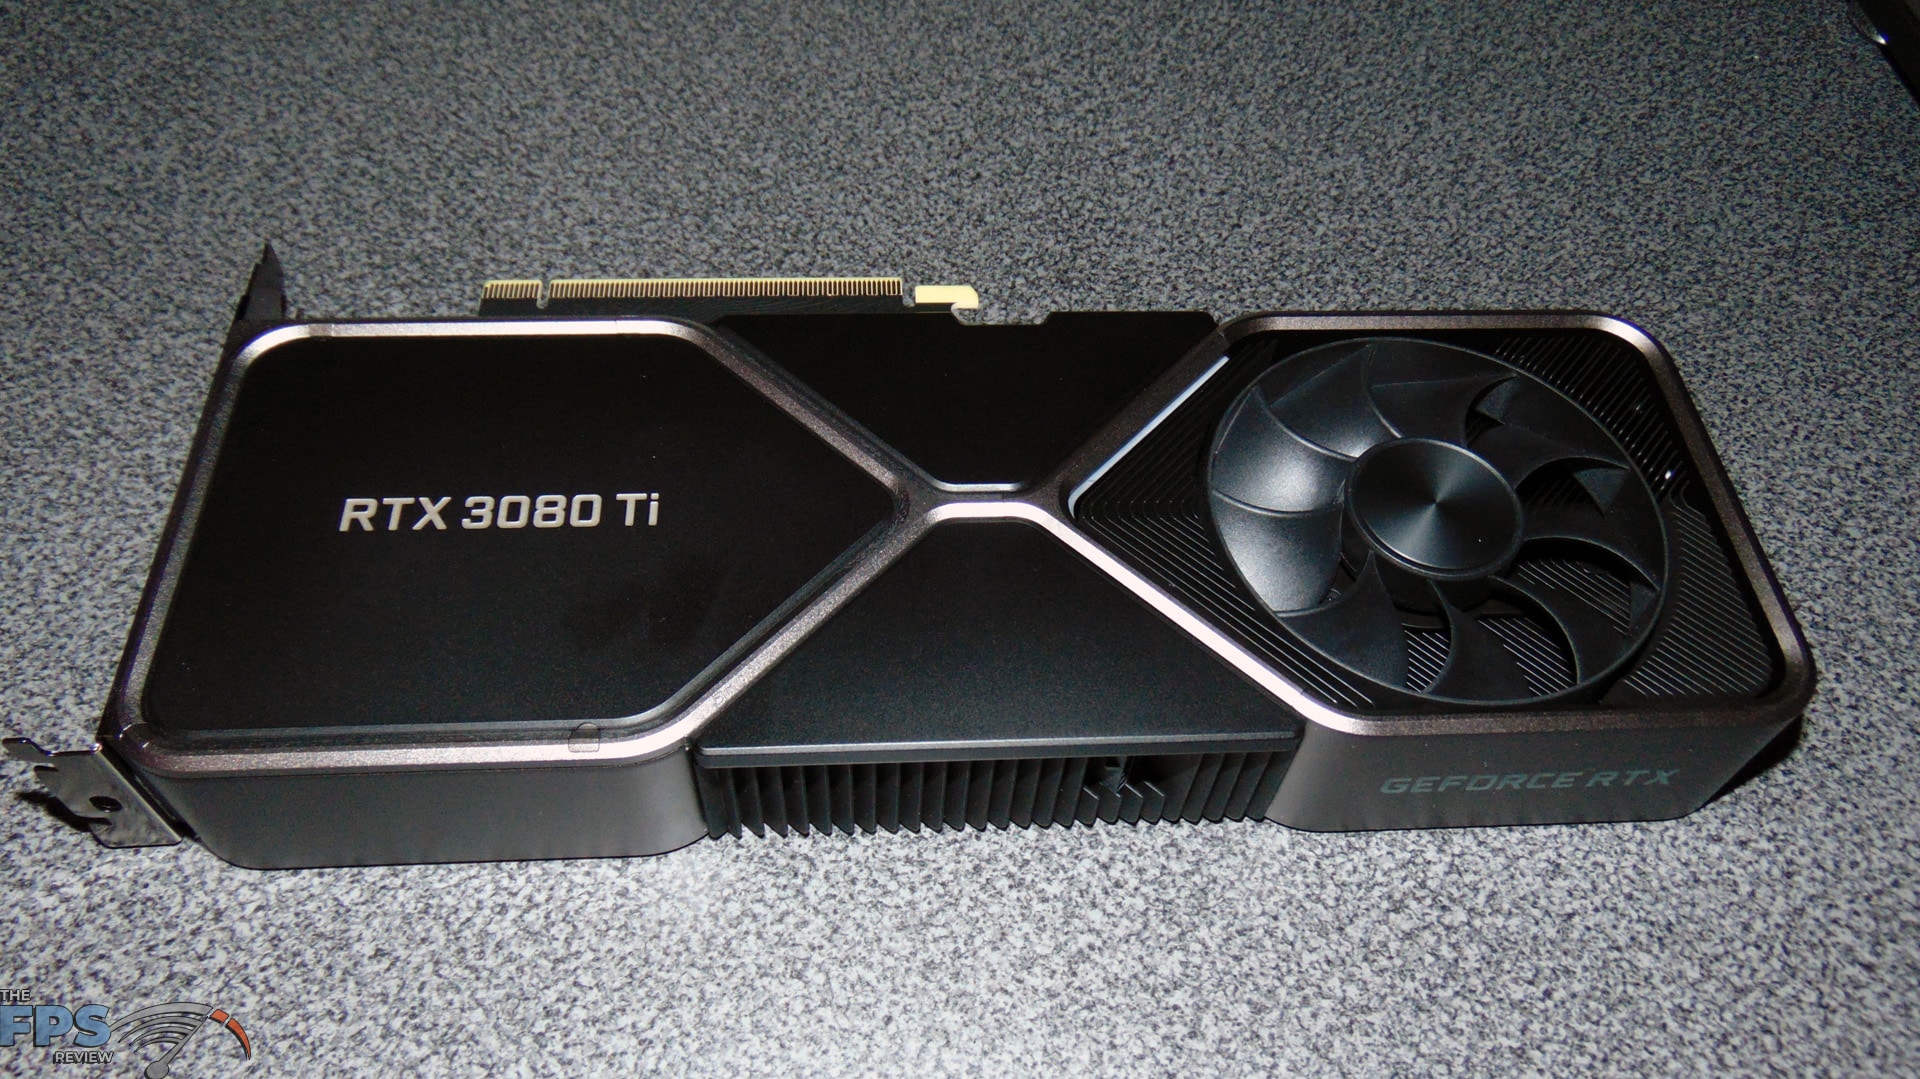 NVIDIA GeForce RTX 3080 Ti Founders Edition Review - The FPS Review